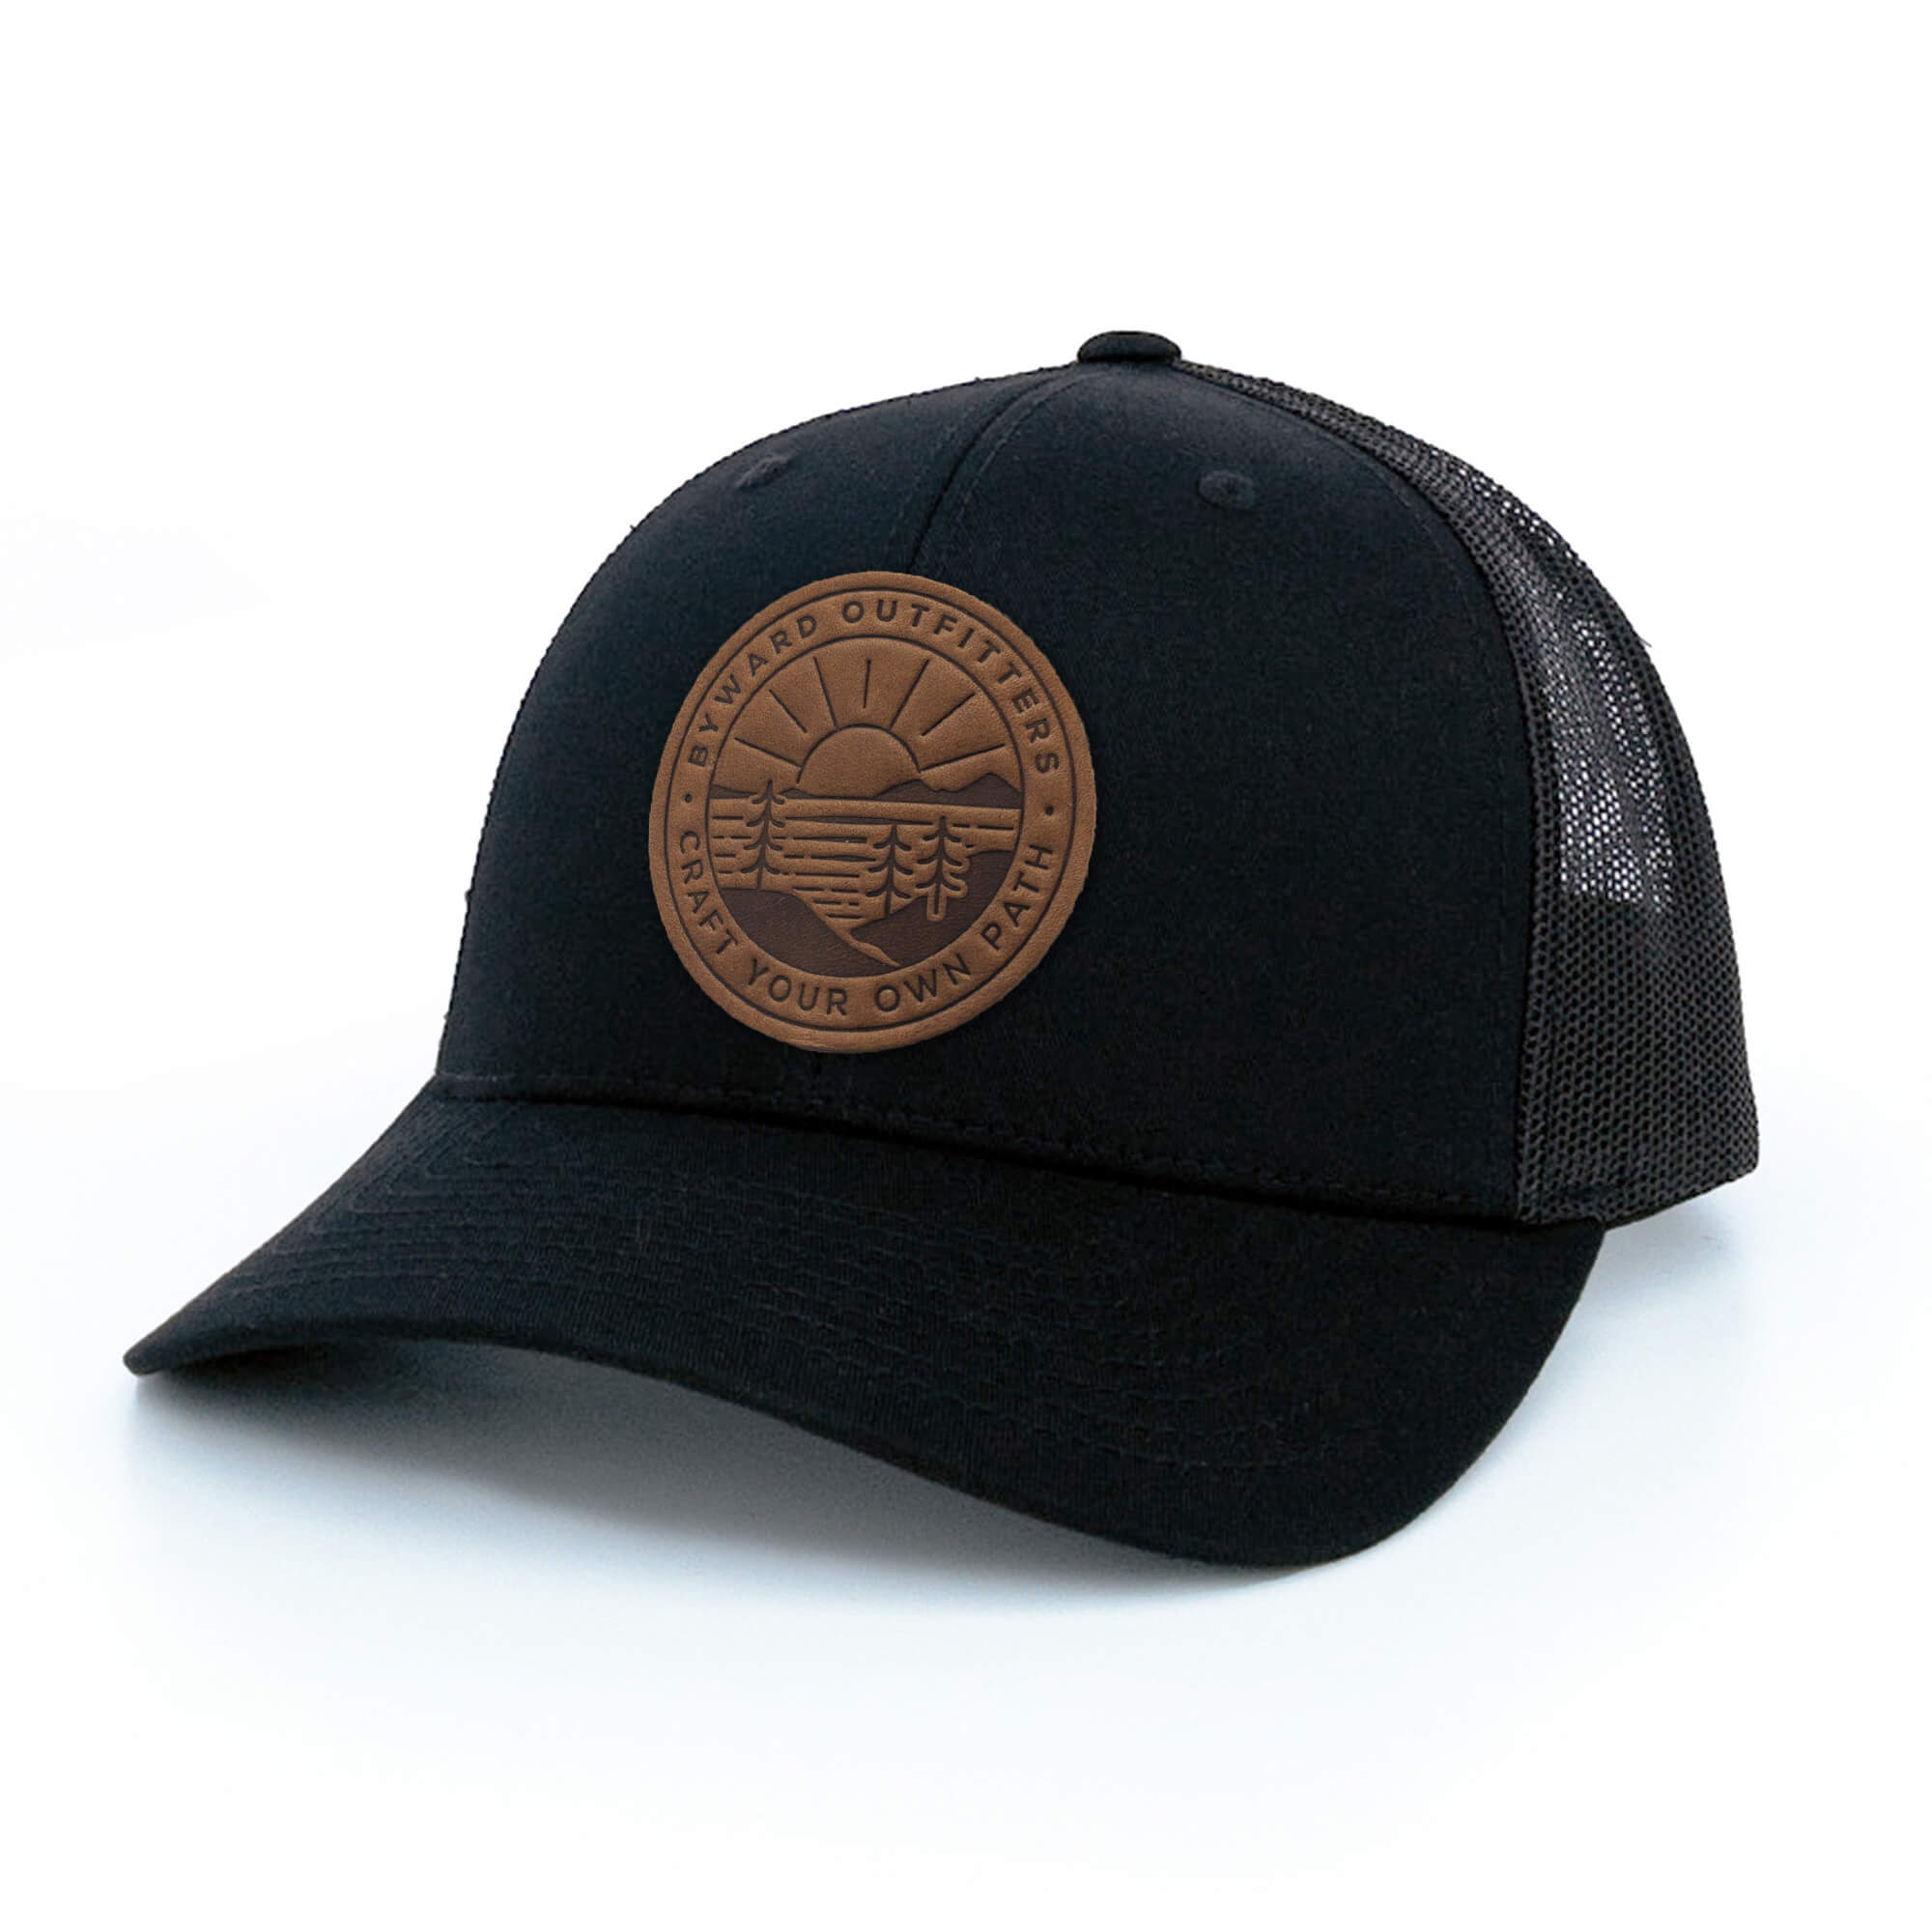 Black trucker hat with full-grain leather patch of Scenic Sunrise | BLACK-005-002, CHARC-005-002, NAVY-005-002, HGREY-005-002, MOSS-005-002, BROWN-005-002